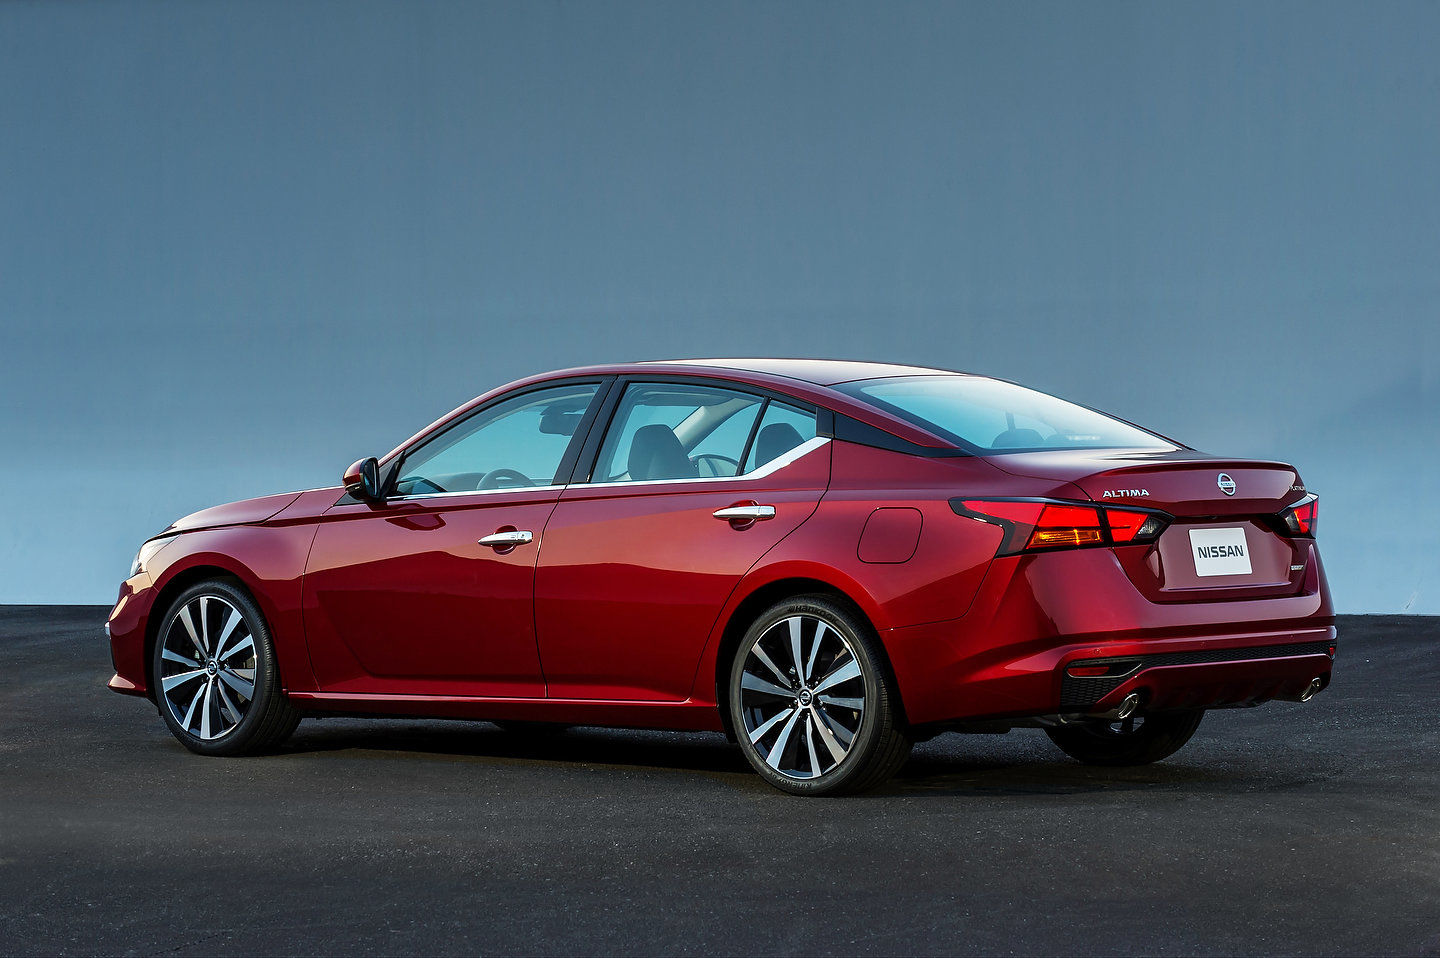 2019 Nissan Altima Wins 12 Best Cars of 2019 by Autotrader.com